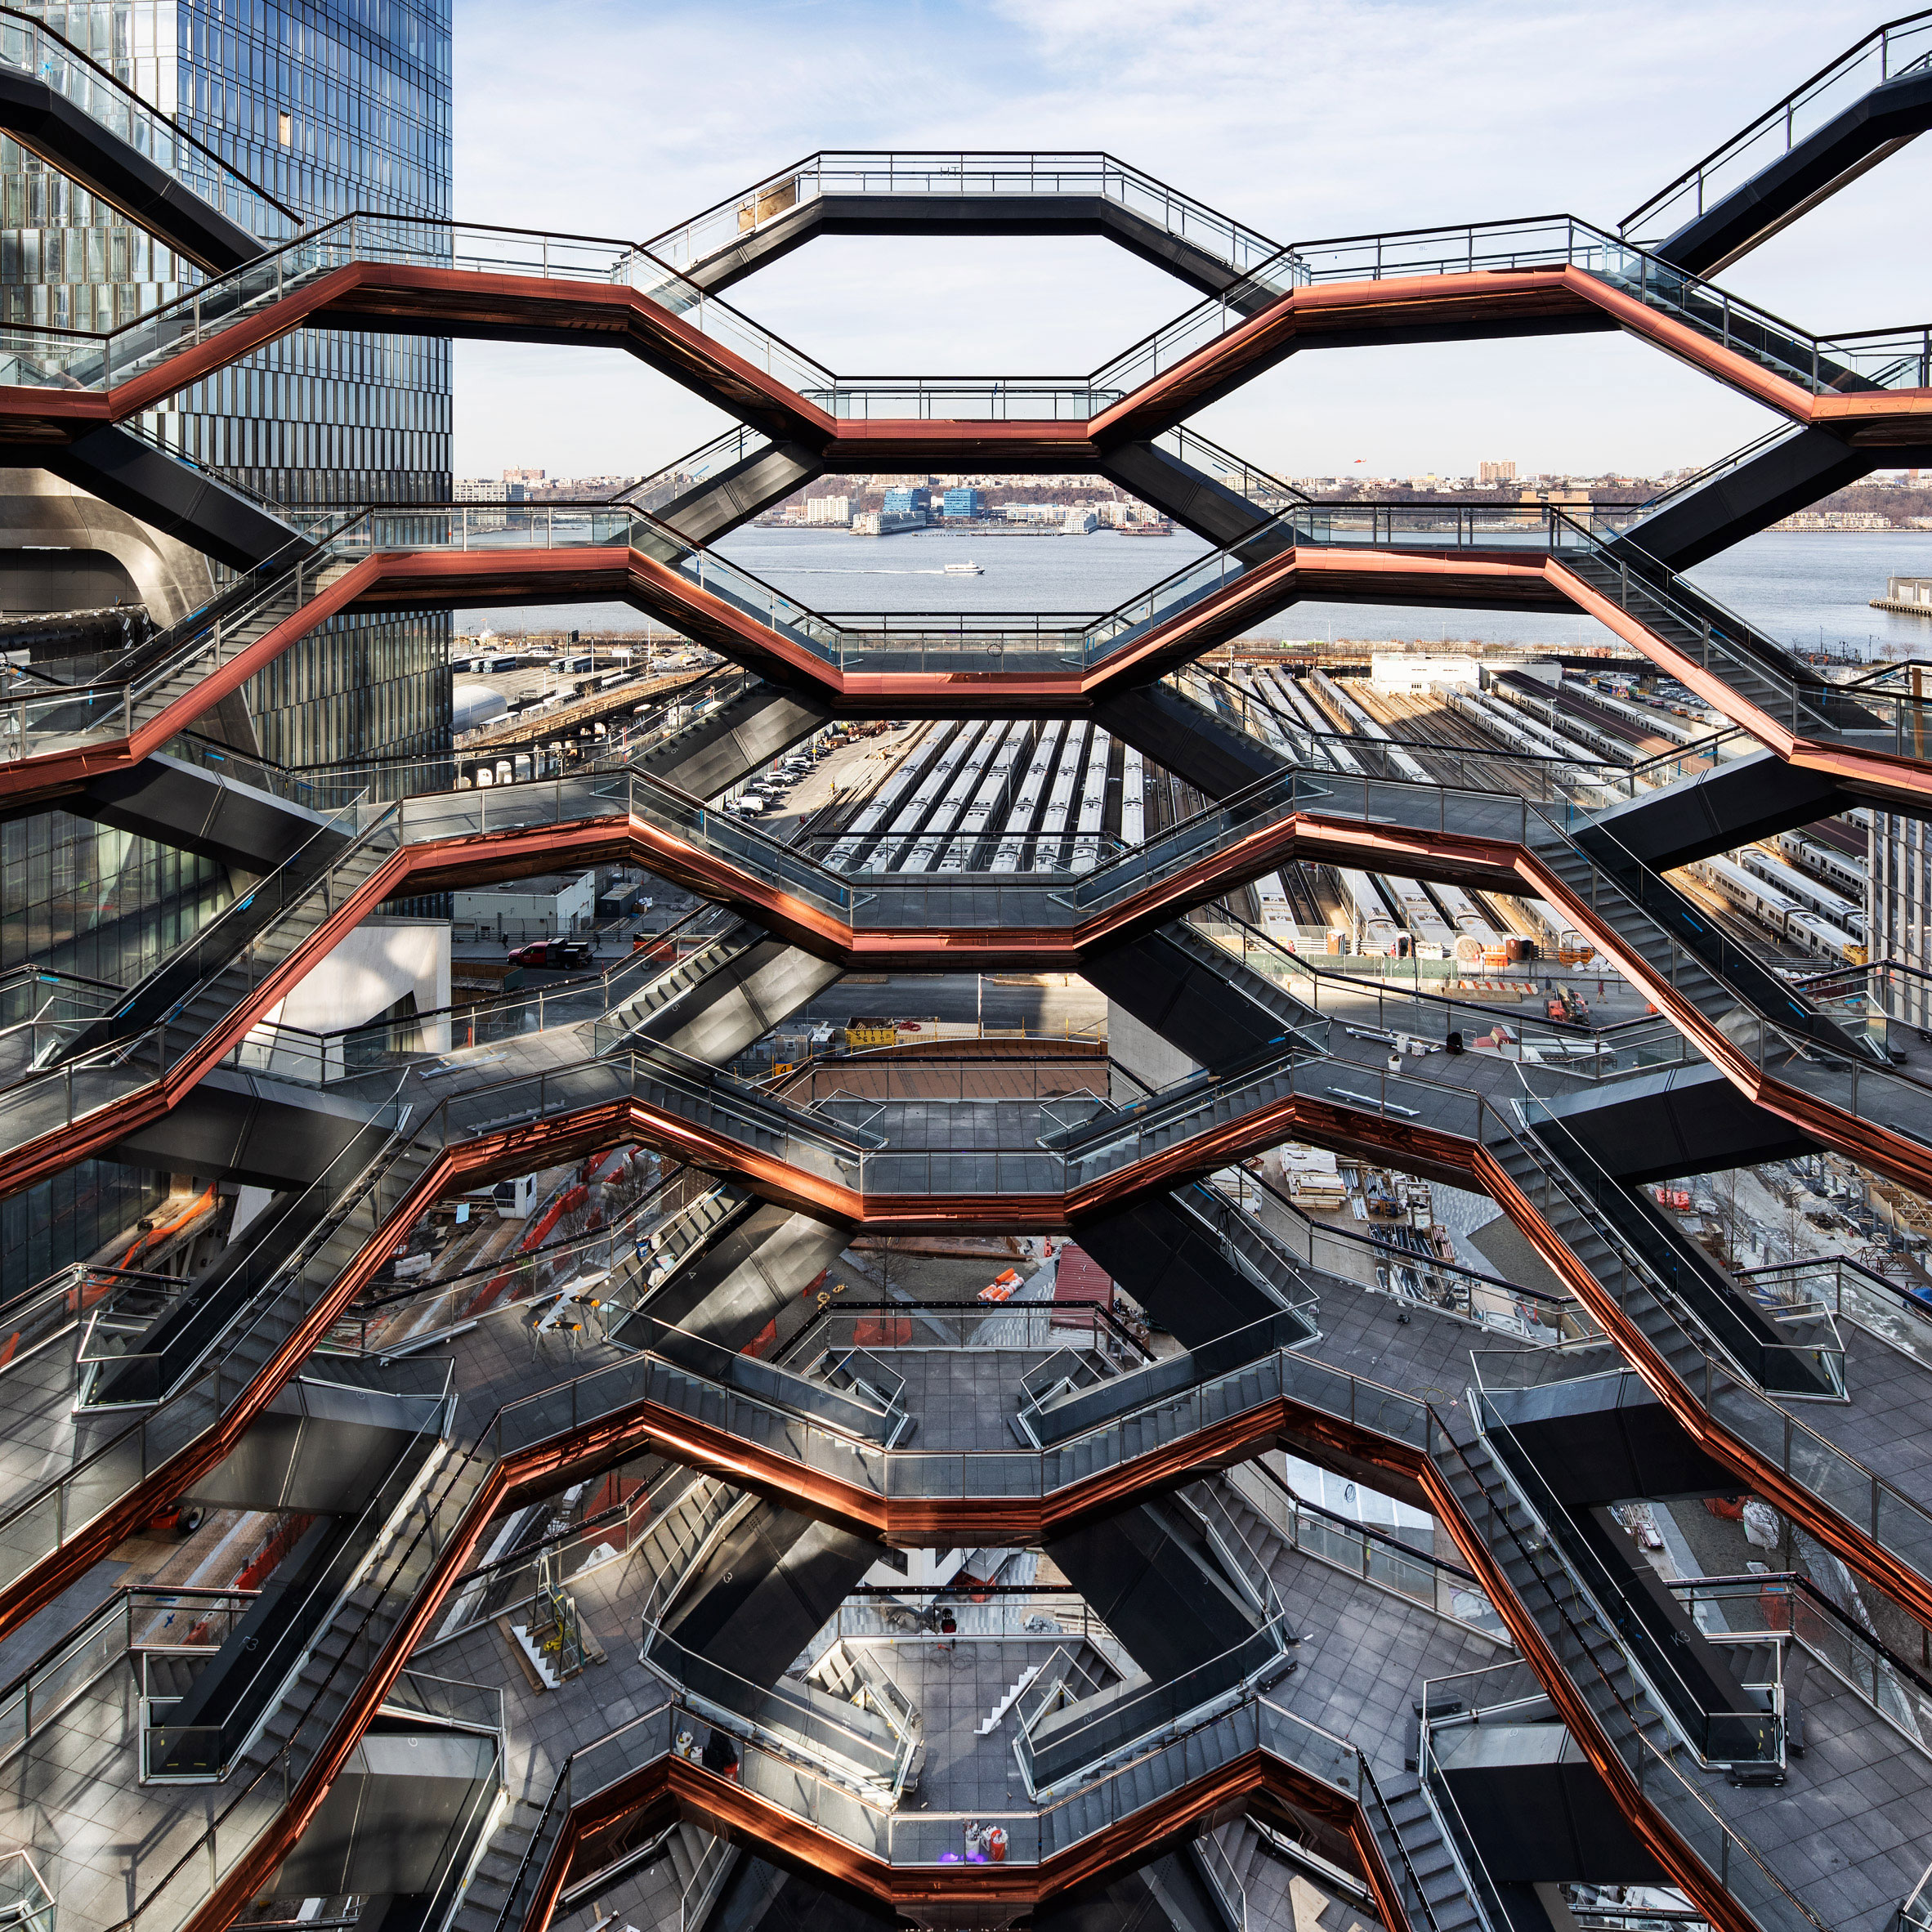 Heatherwick defends Hudson Yards and hits back at critics of his Vessel